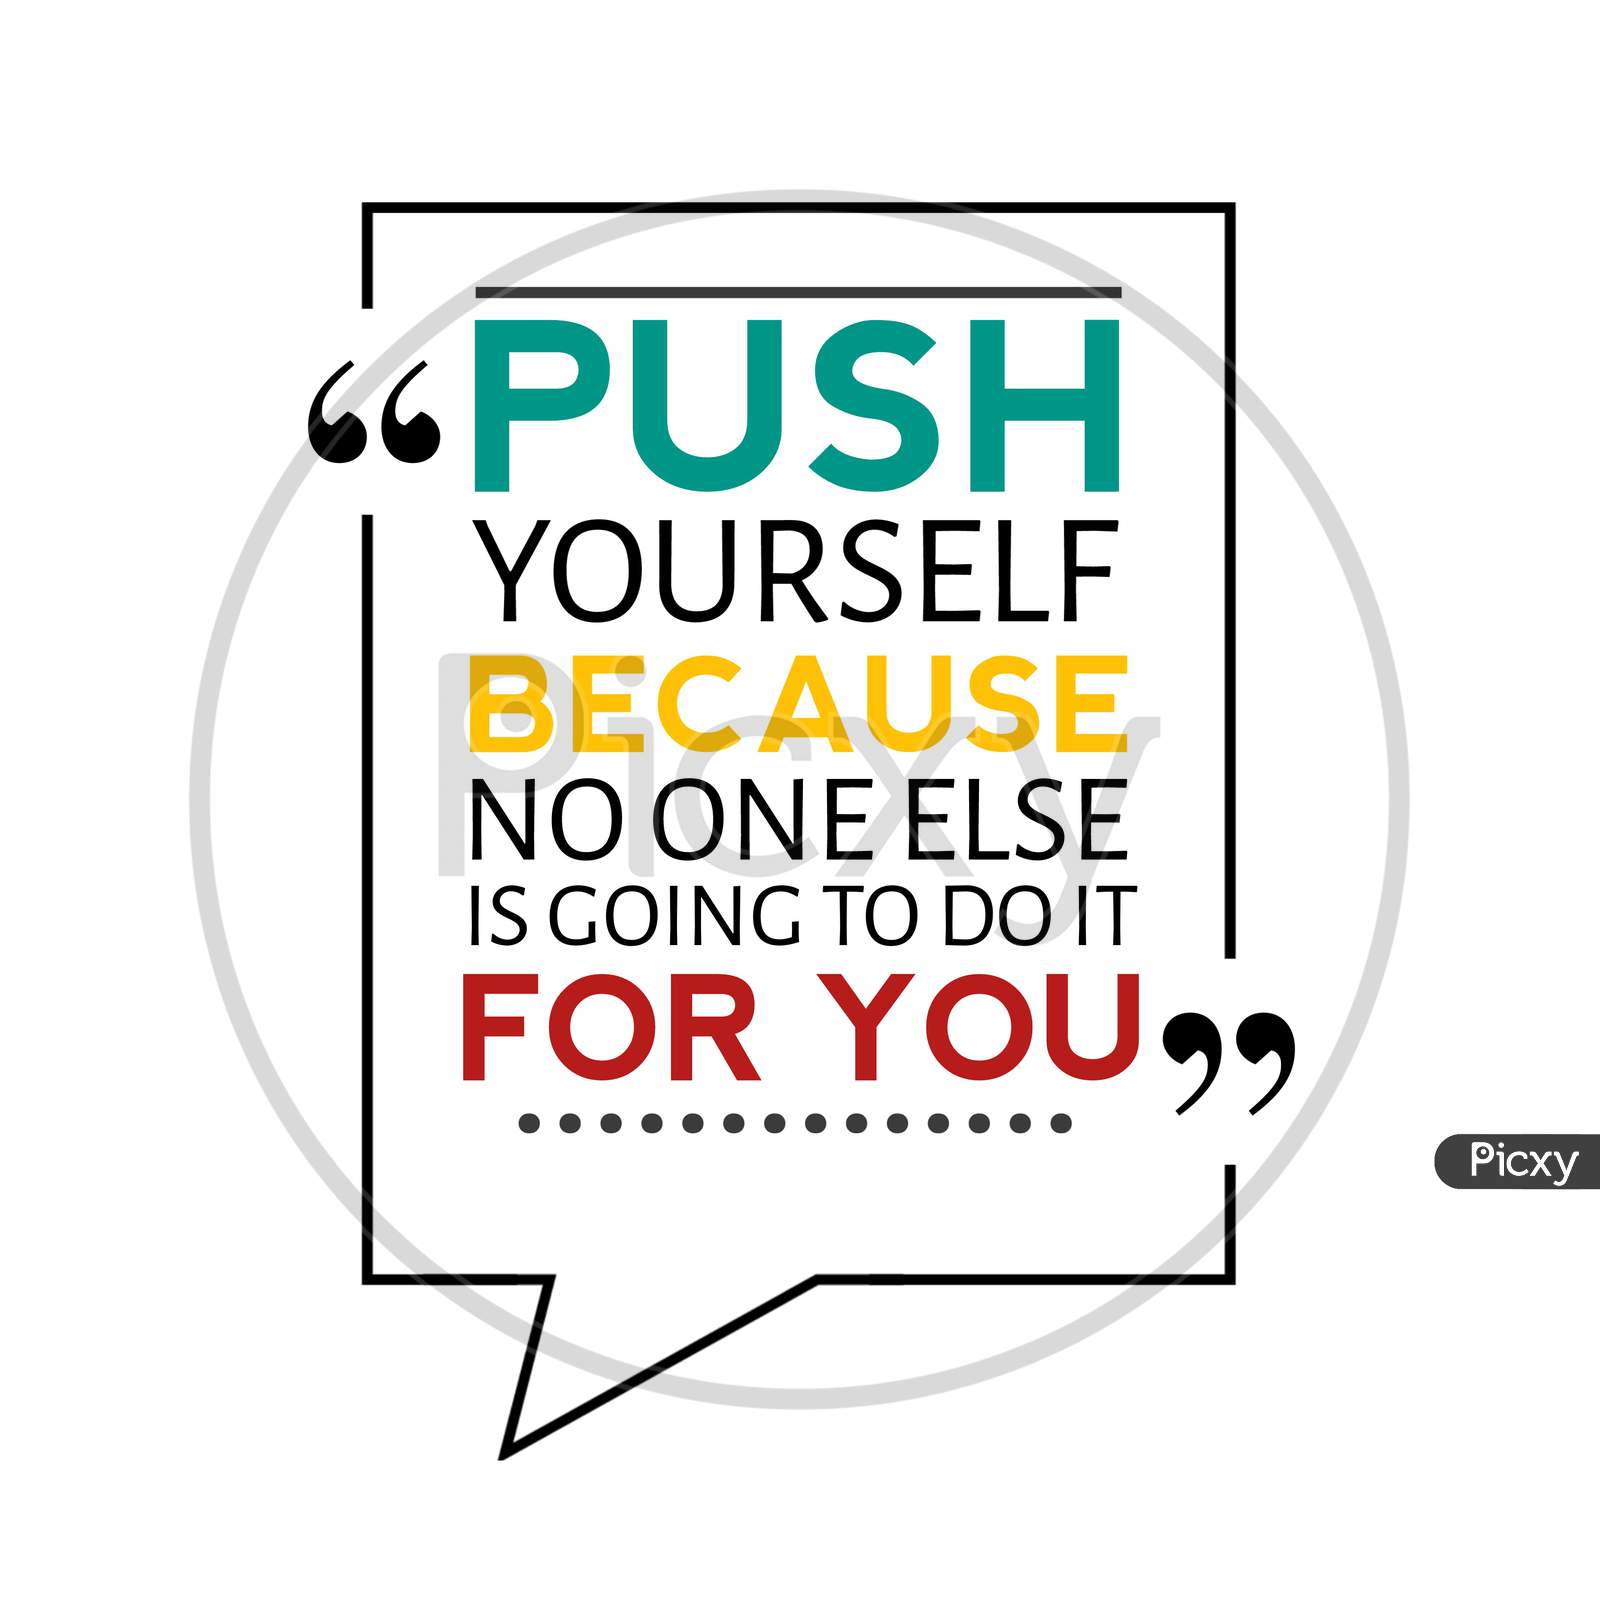 Push Yourself Because No One Else Is Going To Do It For You (white background with colorful fonts)